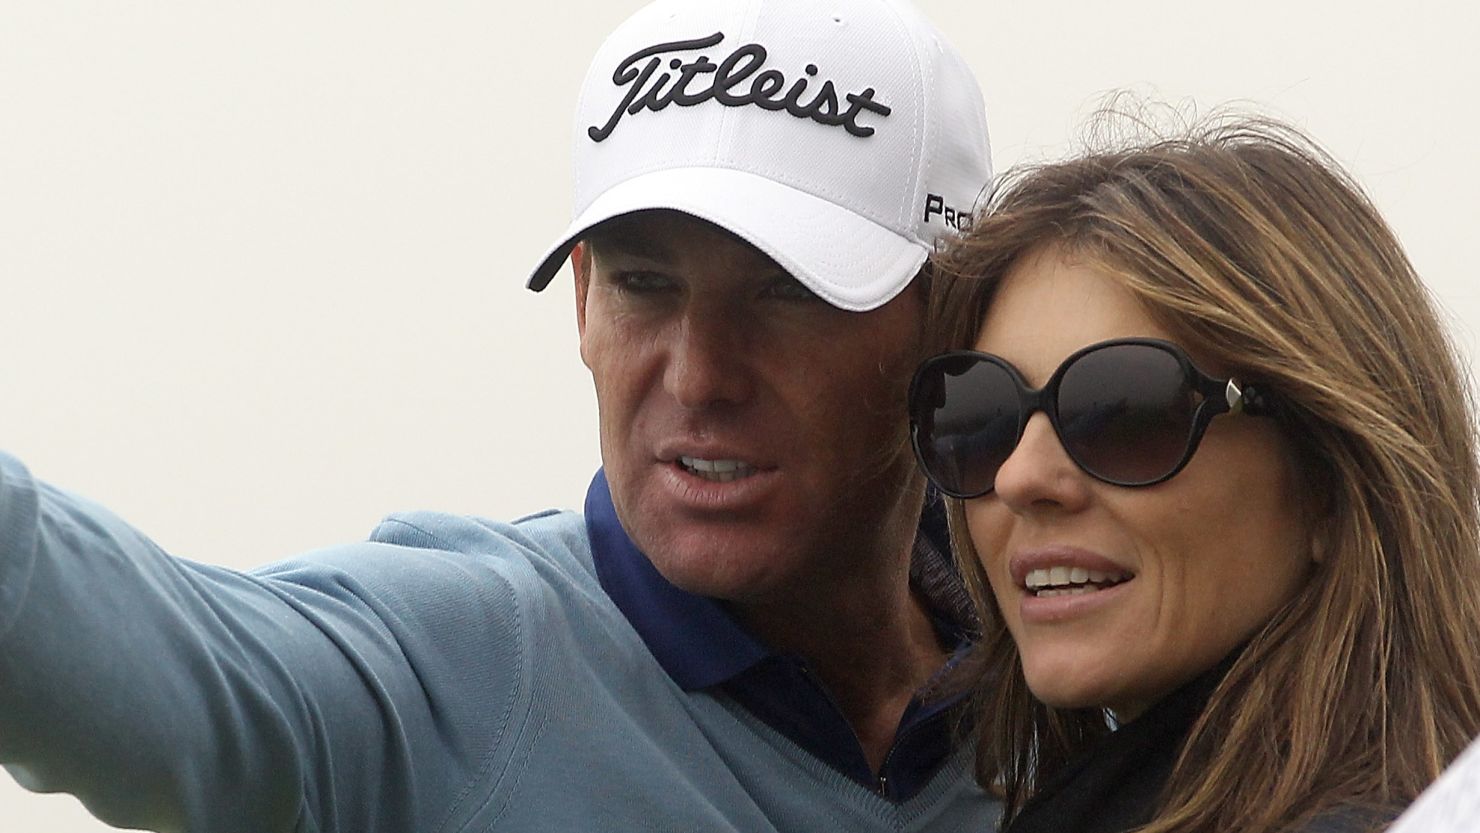 Shane Warne and Elizabeth Hurley watch the action during the third round of The Alfred Dunhill Links Championship.